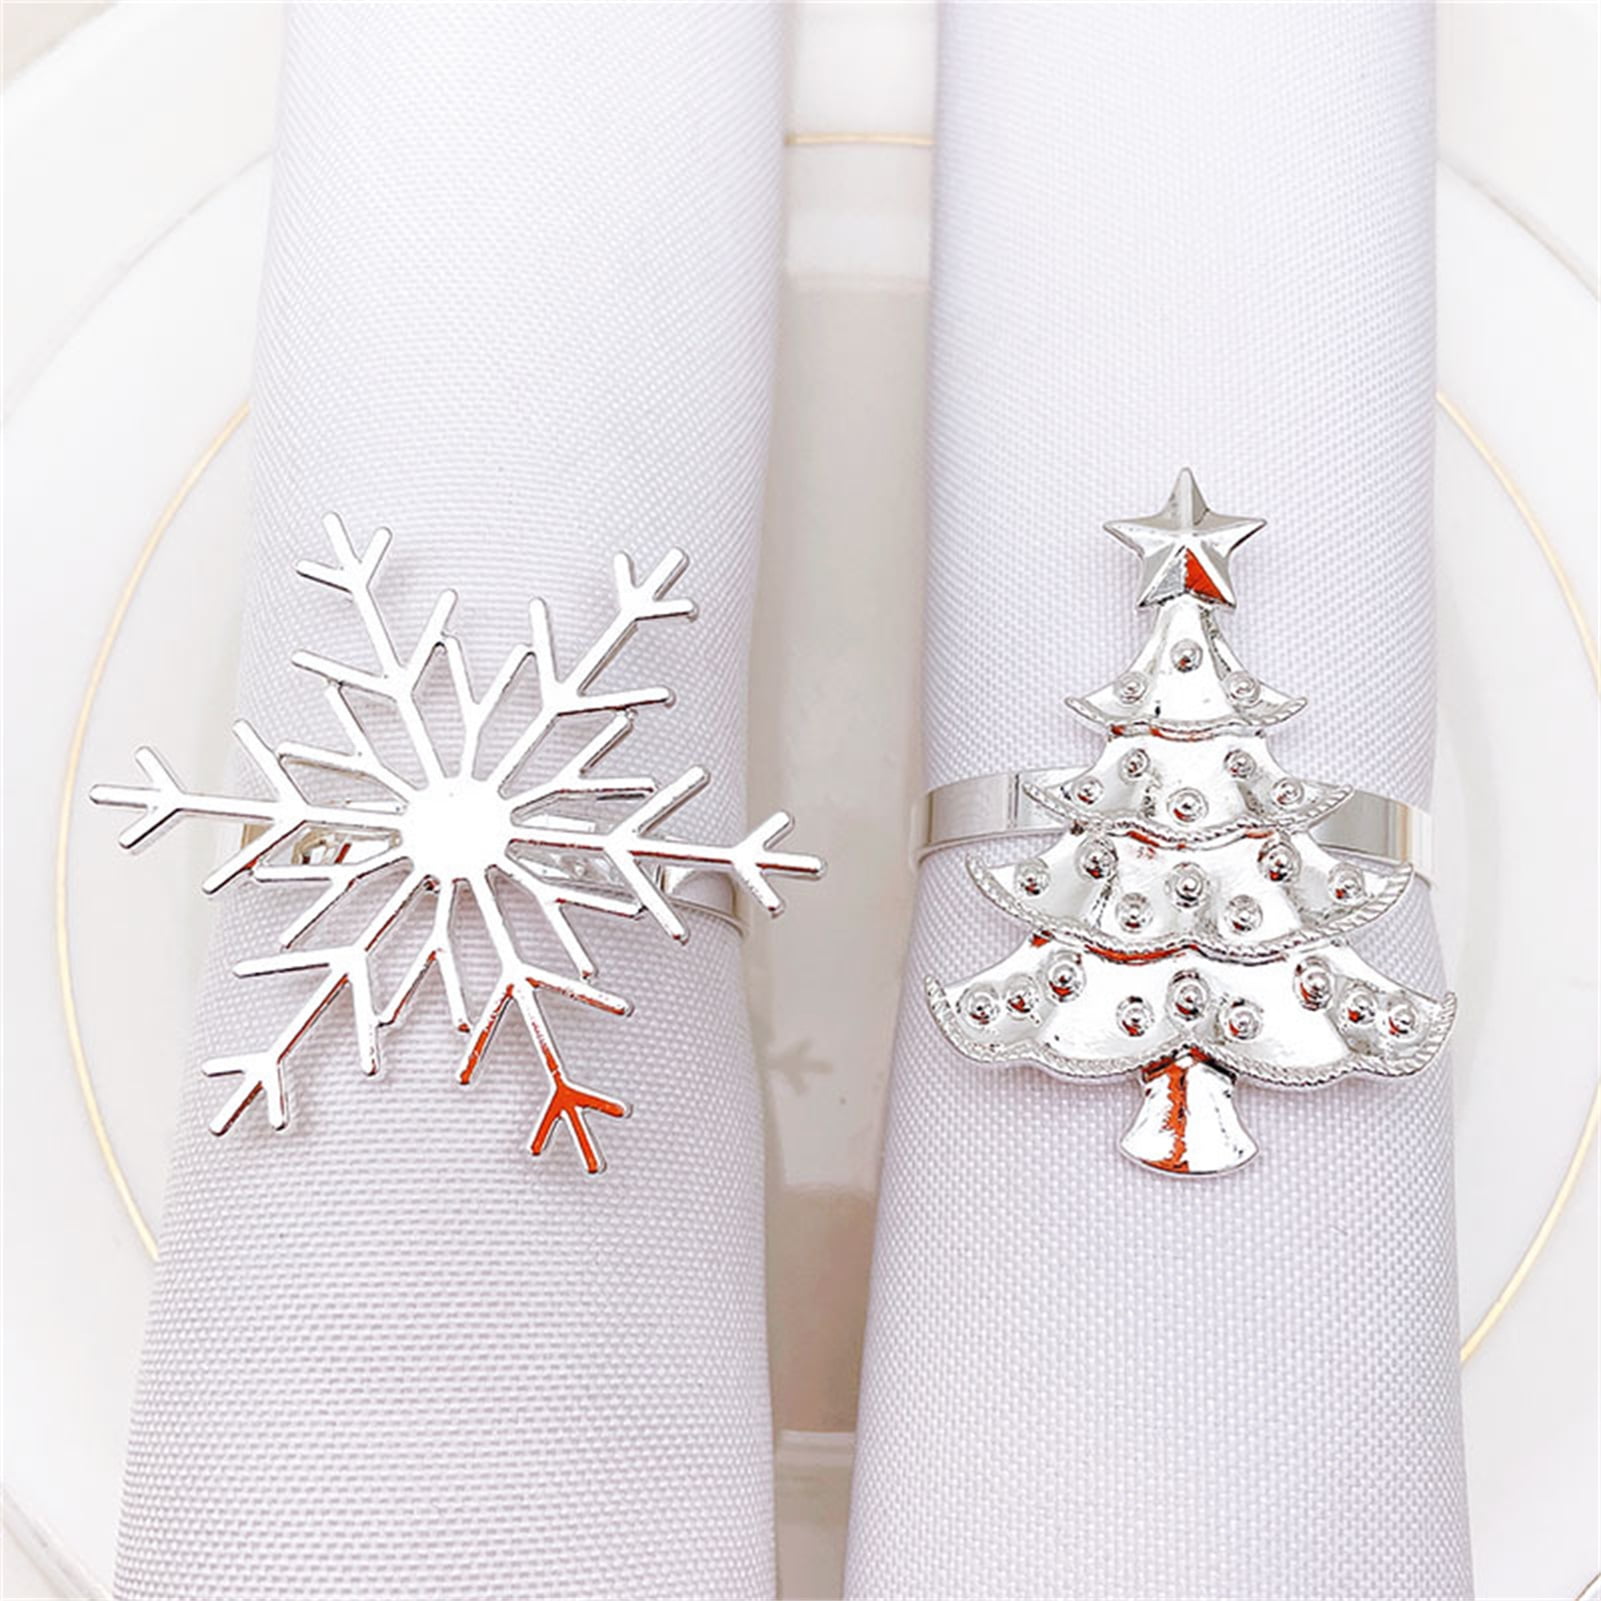 C&f Home Silver Christmas Tree Napkin Ring S/4 : Target